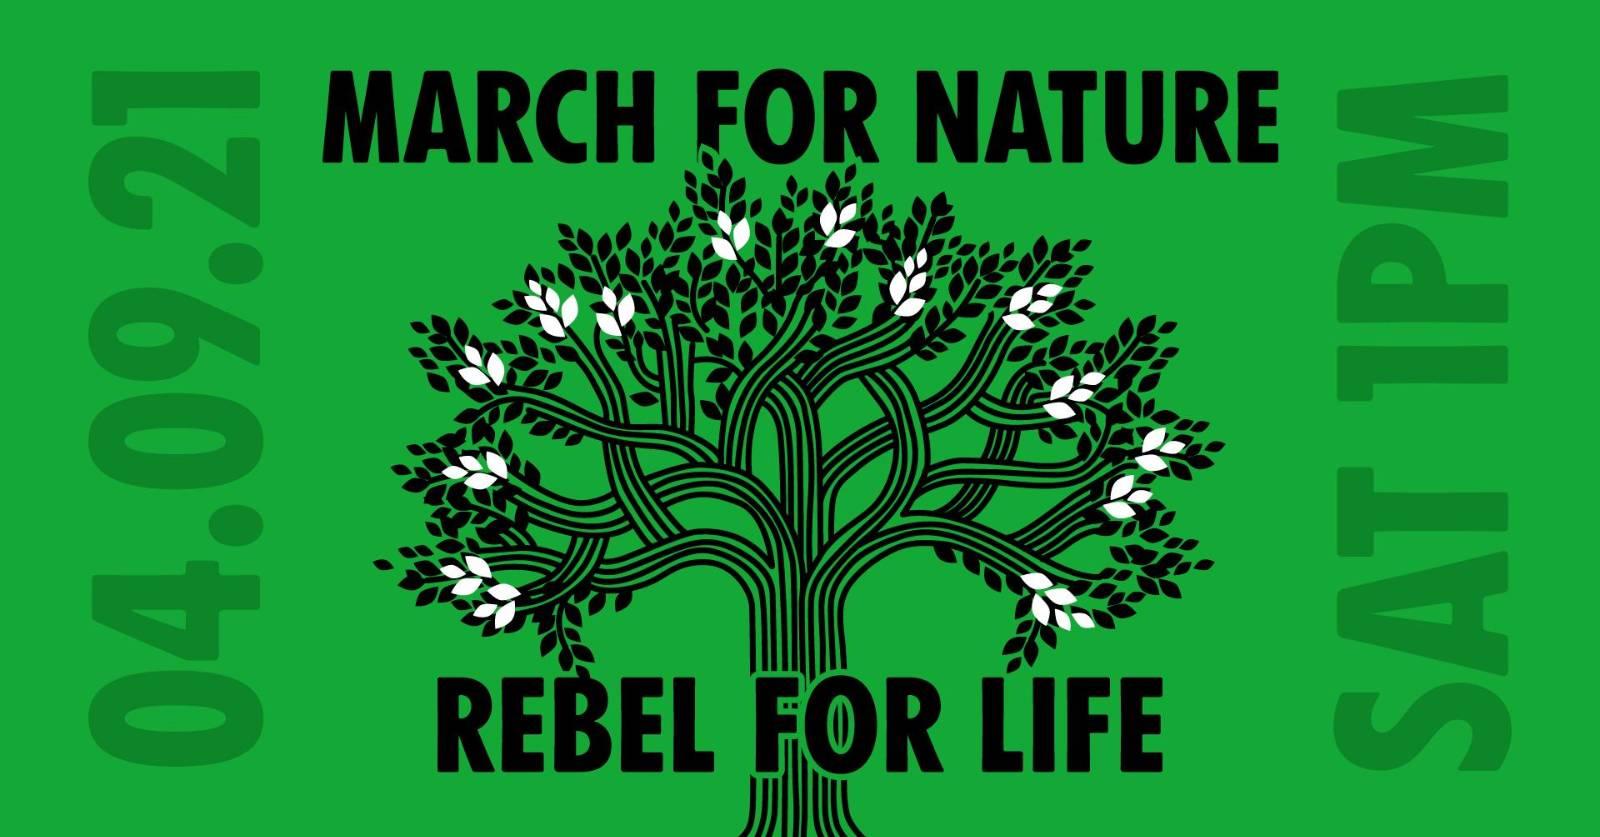 March for nature, rebel for life, 4th September 1PM